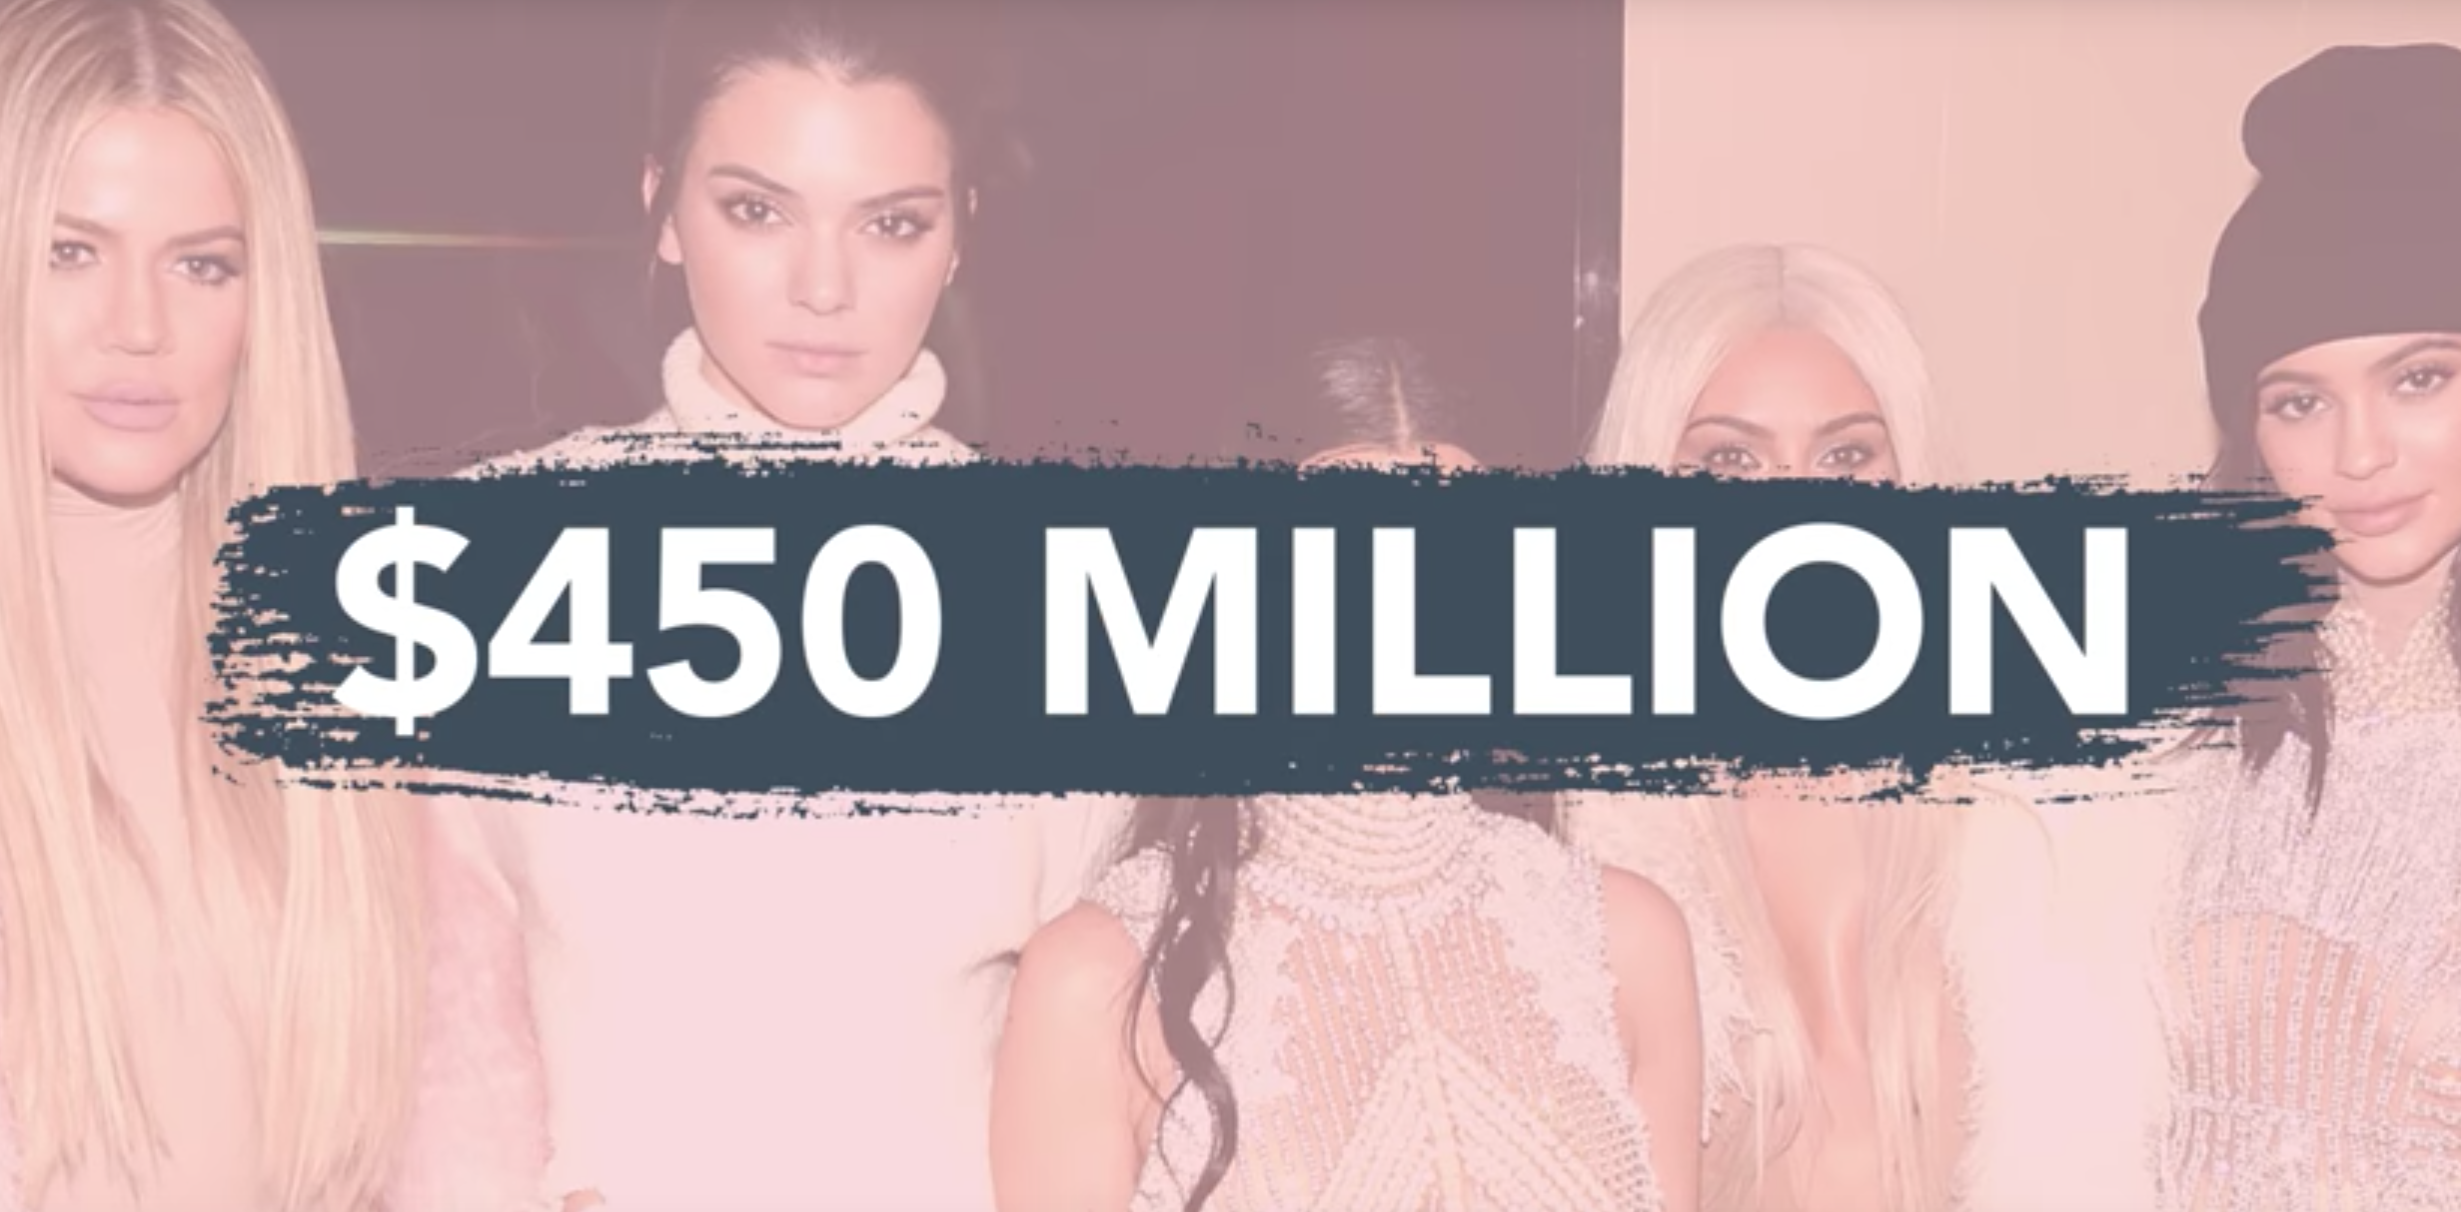 Want to Be a Better Marketer? You Should Be Keeping Up With The Kardashians [Video]